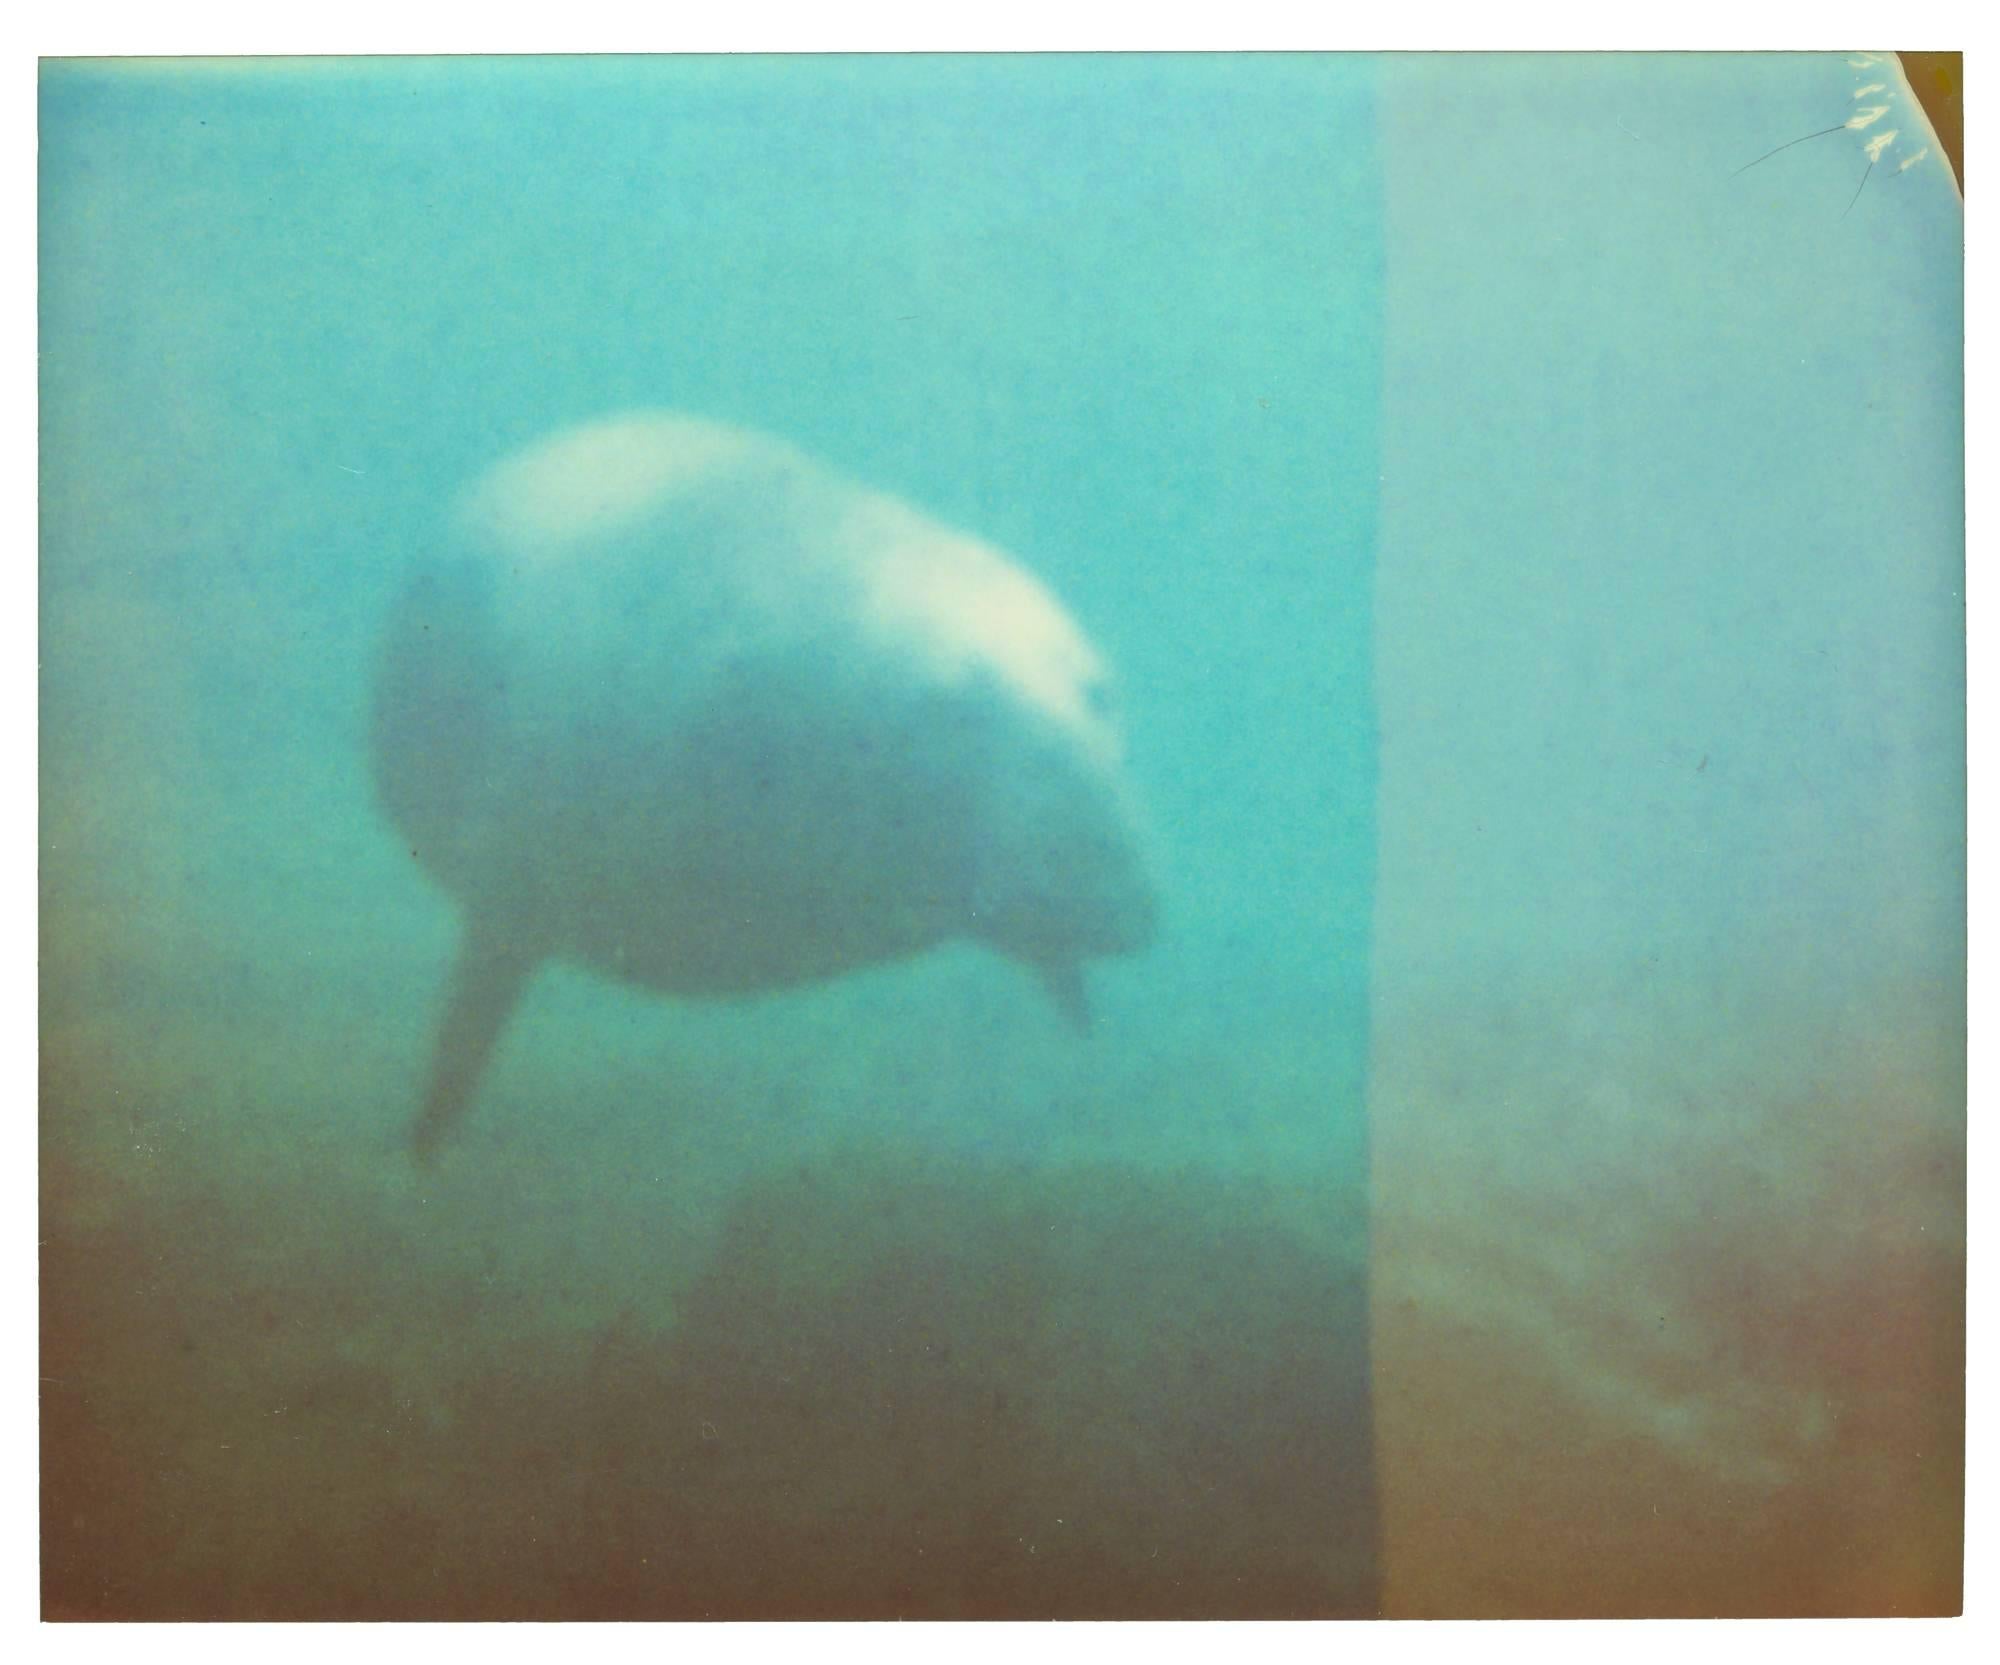 Dugong - Stay, Contemporary, Abstract, Landscape, USA, Polaroid, Photograph